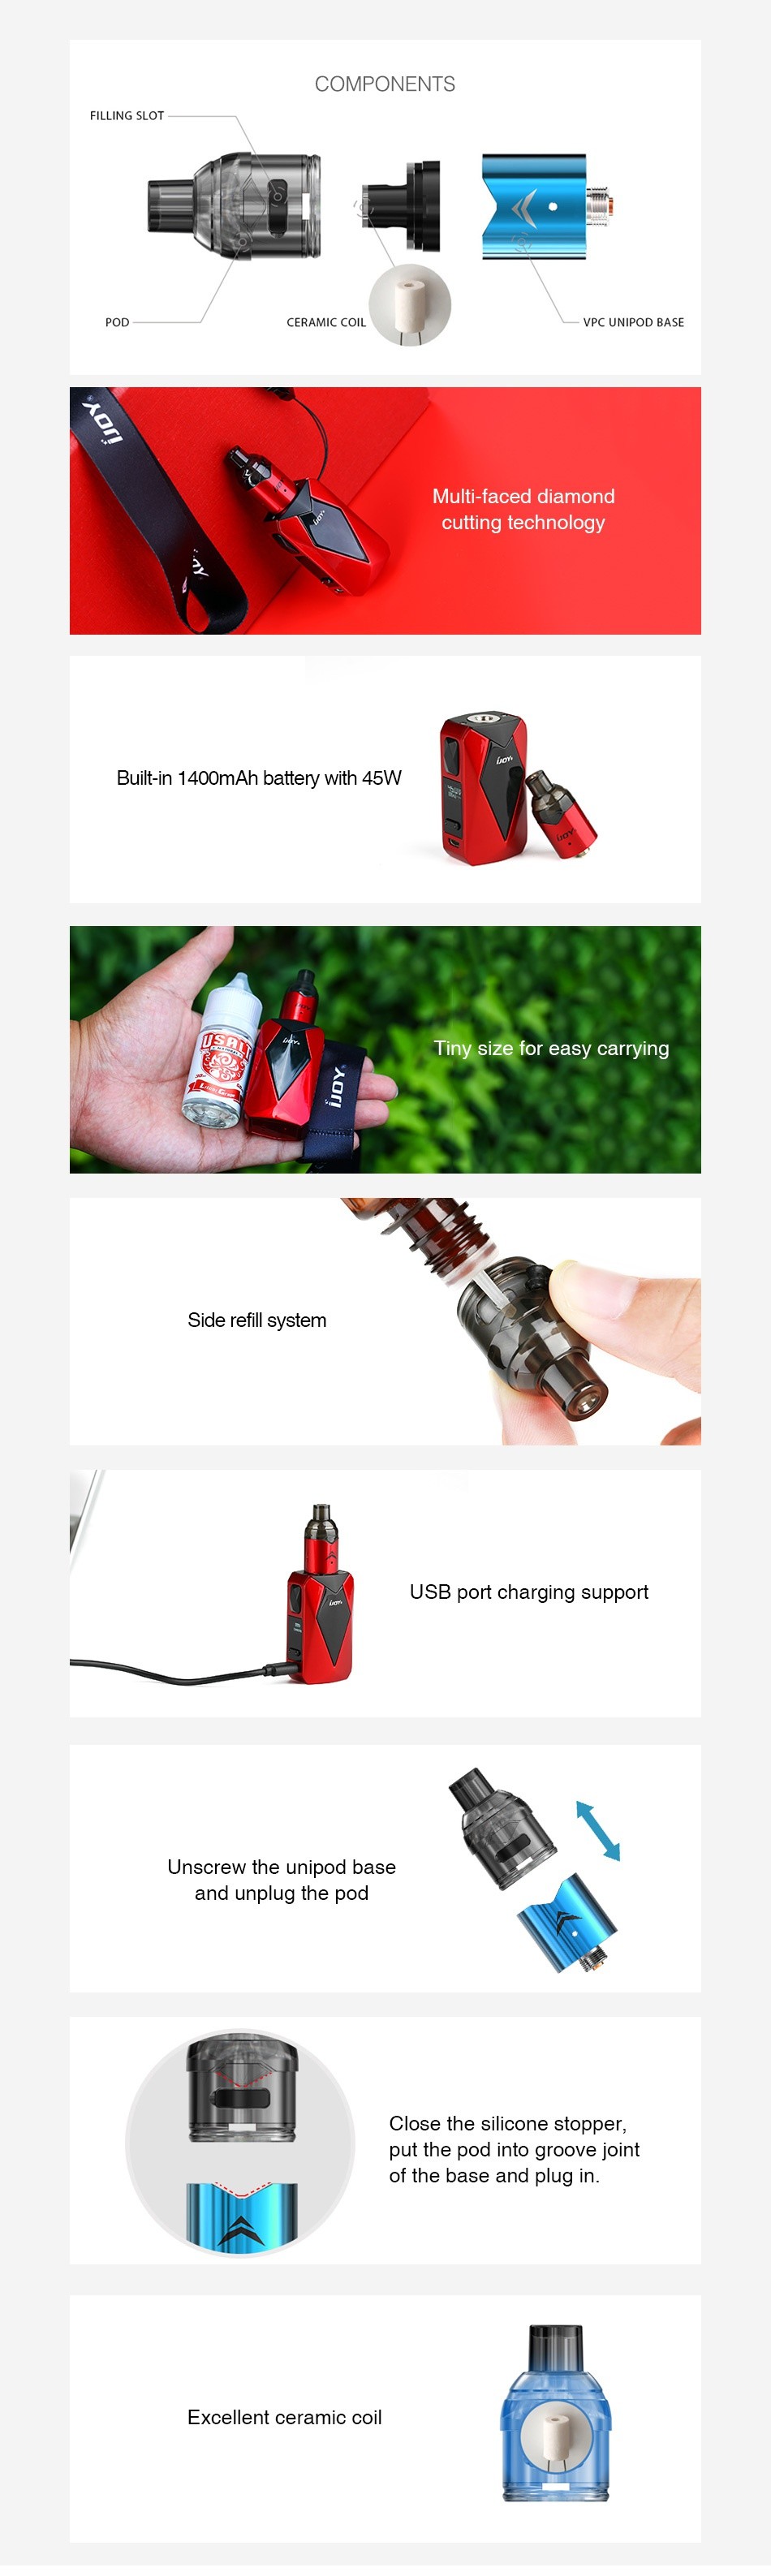 IJOY Diamond VPC Starter Kit 1400mAh FILLING SLOT CERAMIC COIL VPC UNIPCD BASE ulti faced diamond Built in 1400mAh battery with 45W Tiny size for easy carrying Side refill system USB port charging support and unplug the pod Close the silicone stopper put the pod into groove joint of the base and plug in